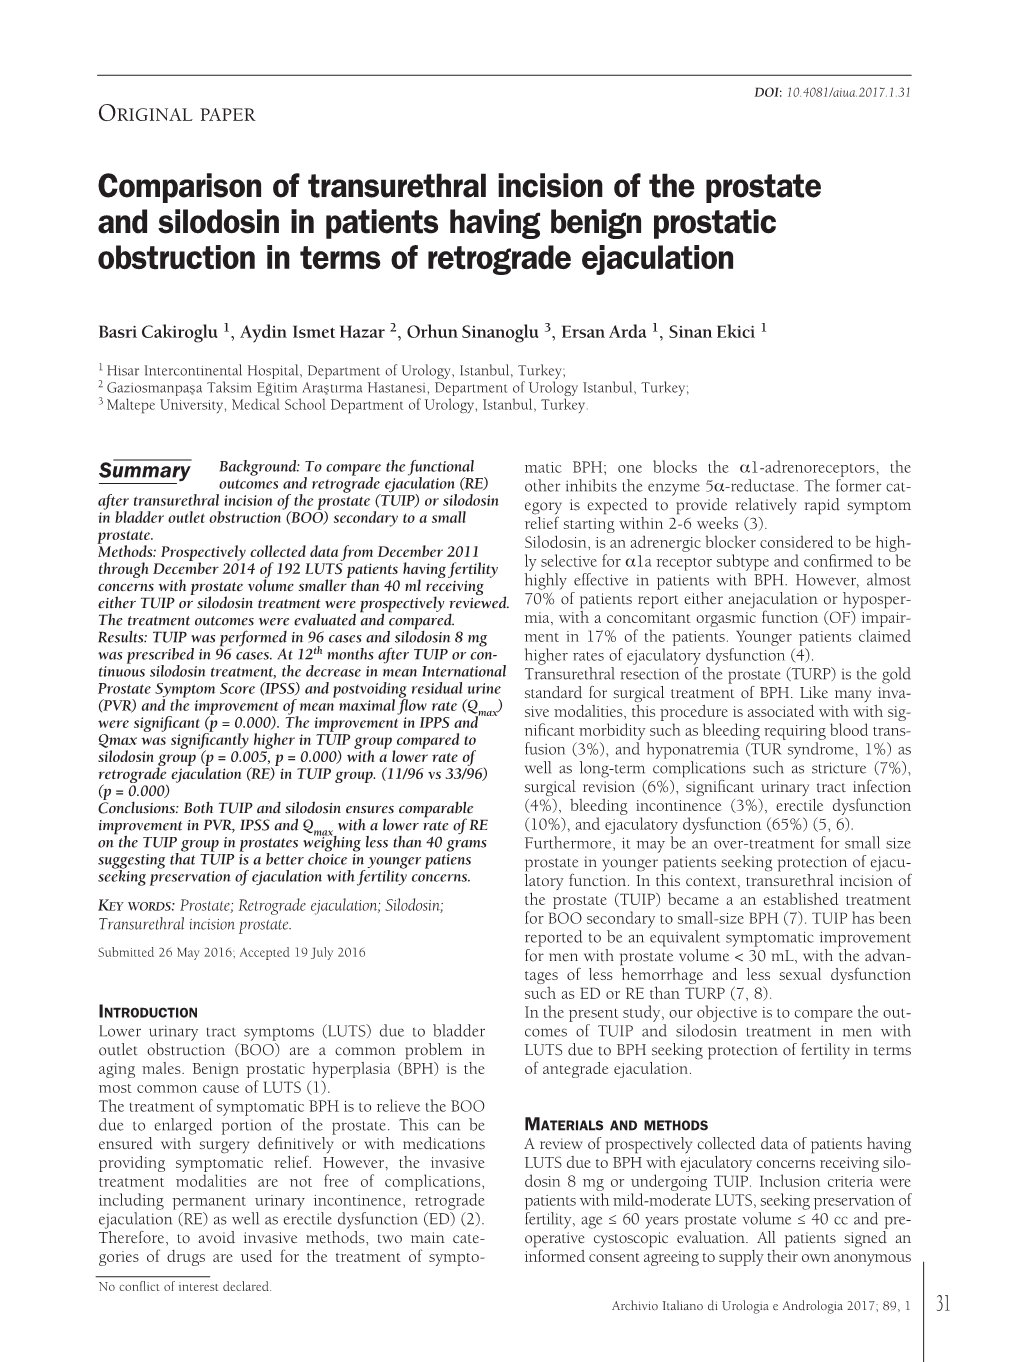 Comparison of Transurethral Incision of the Prostate and Silodosin in Patients Having Benign Prostatic Obstruction in Terms of Retrograde Ejaculation